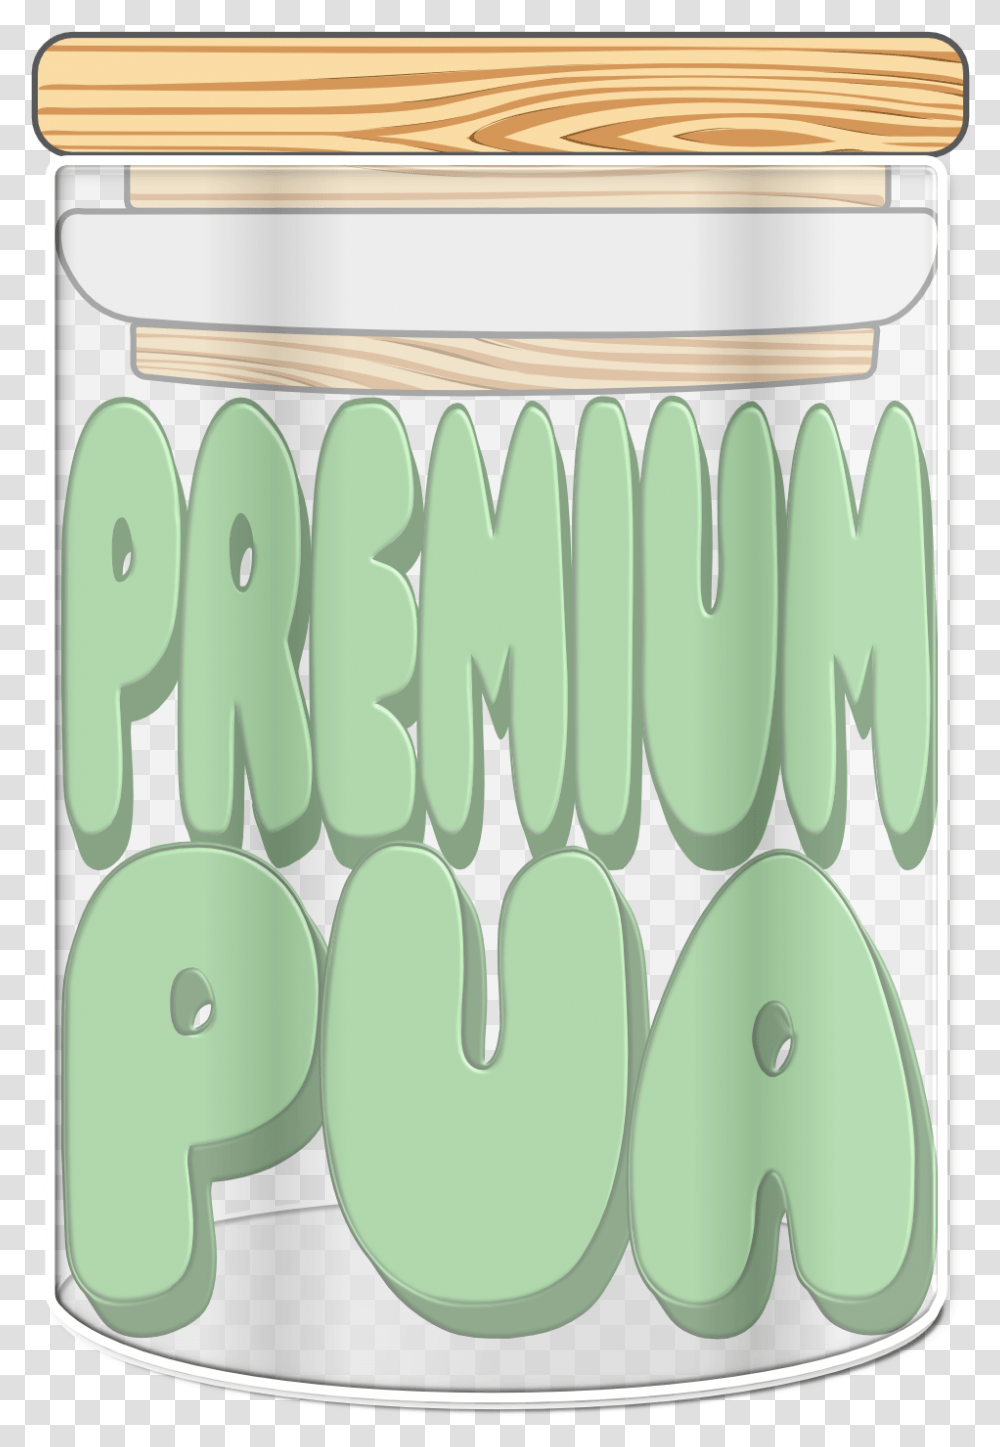 We Like To Think Of Premium Pua As The Culmination, Bottle, Beverage, Drink, Liquor Transparent Png